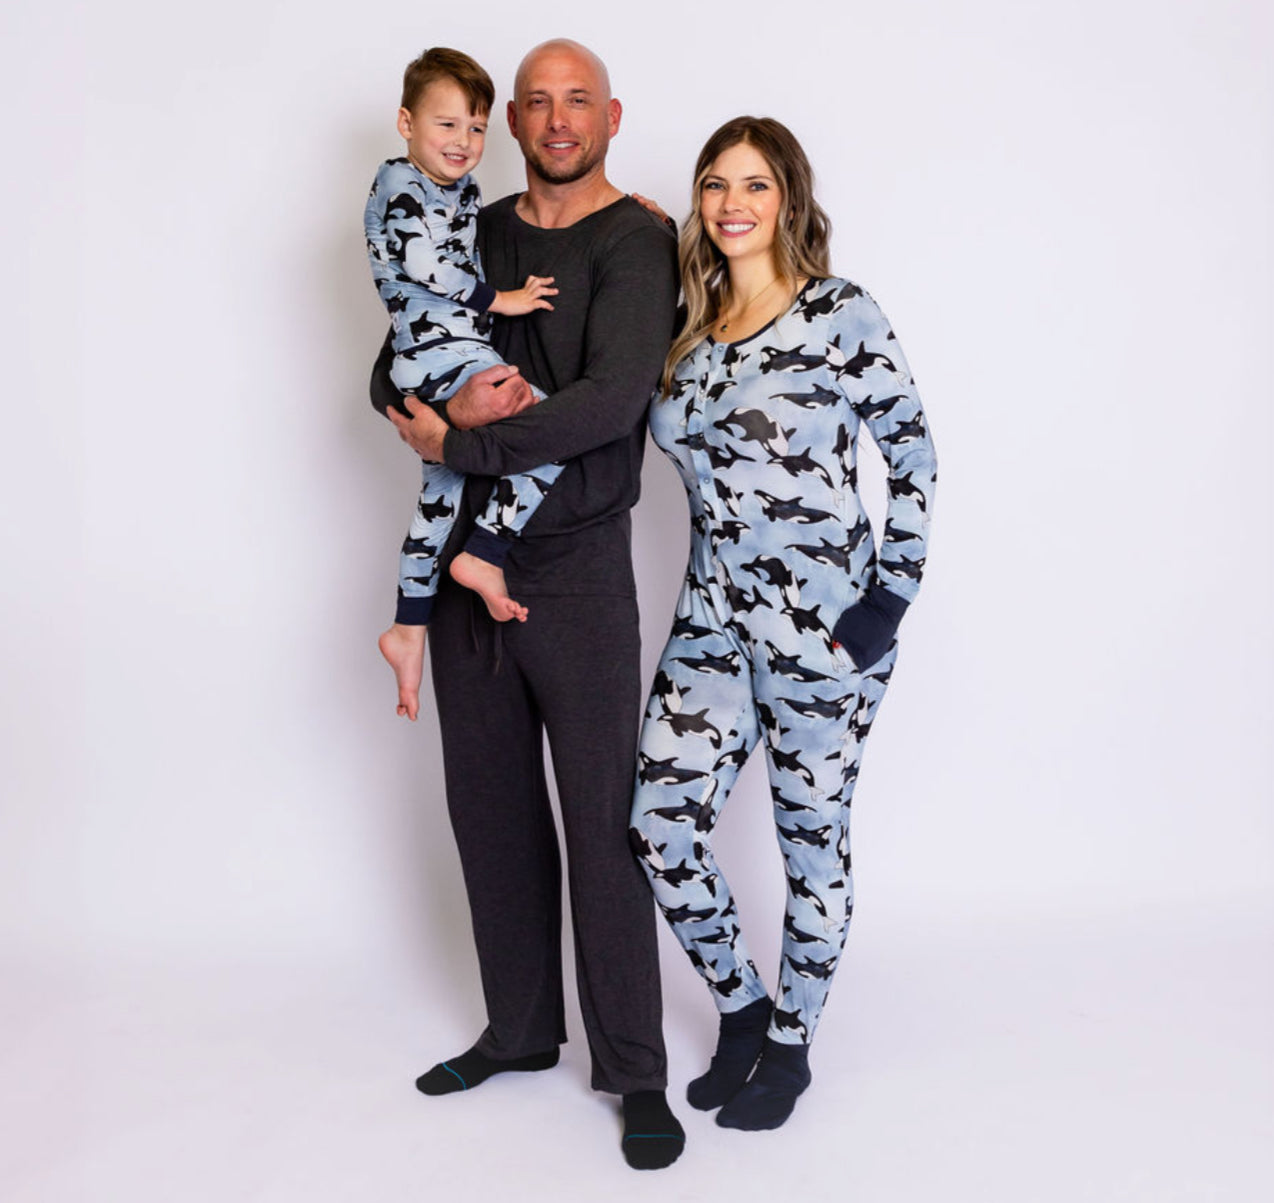 Save the Whales At Your Leisure Snap Down Adult Romper- 3X-5X